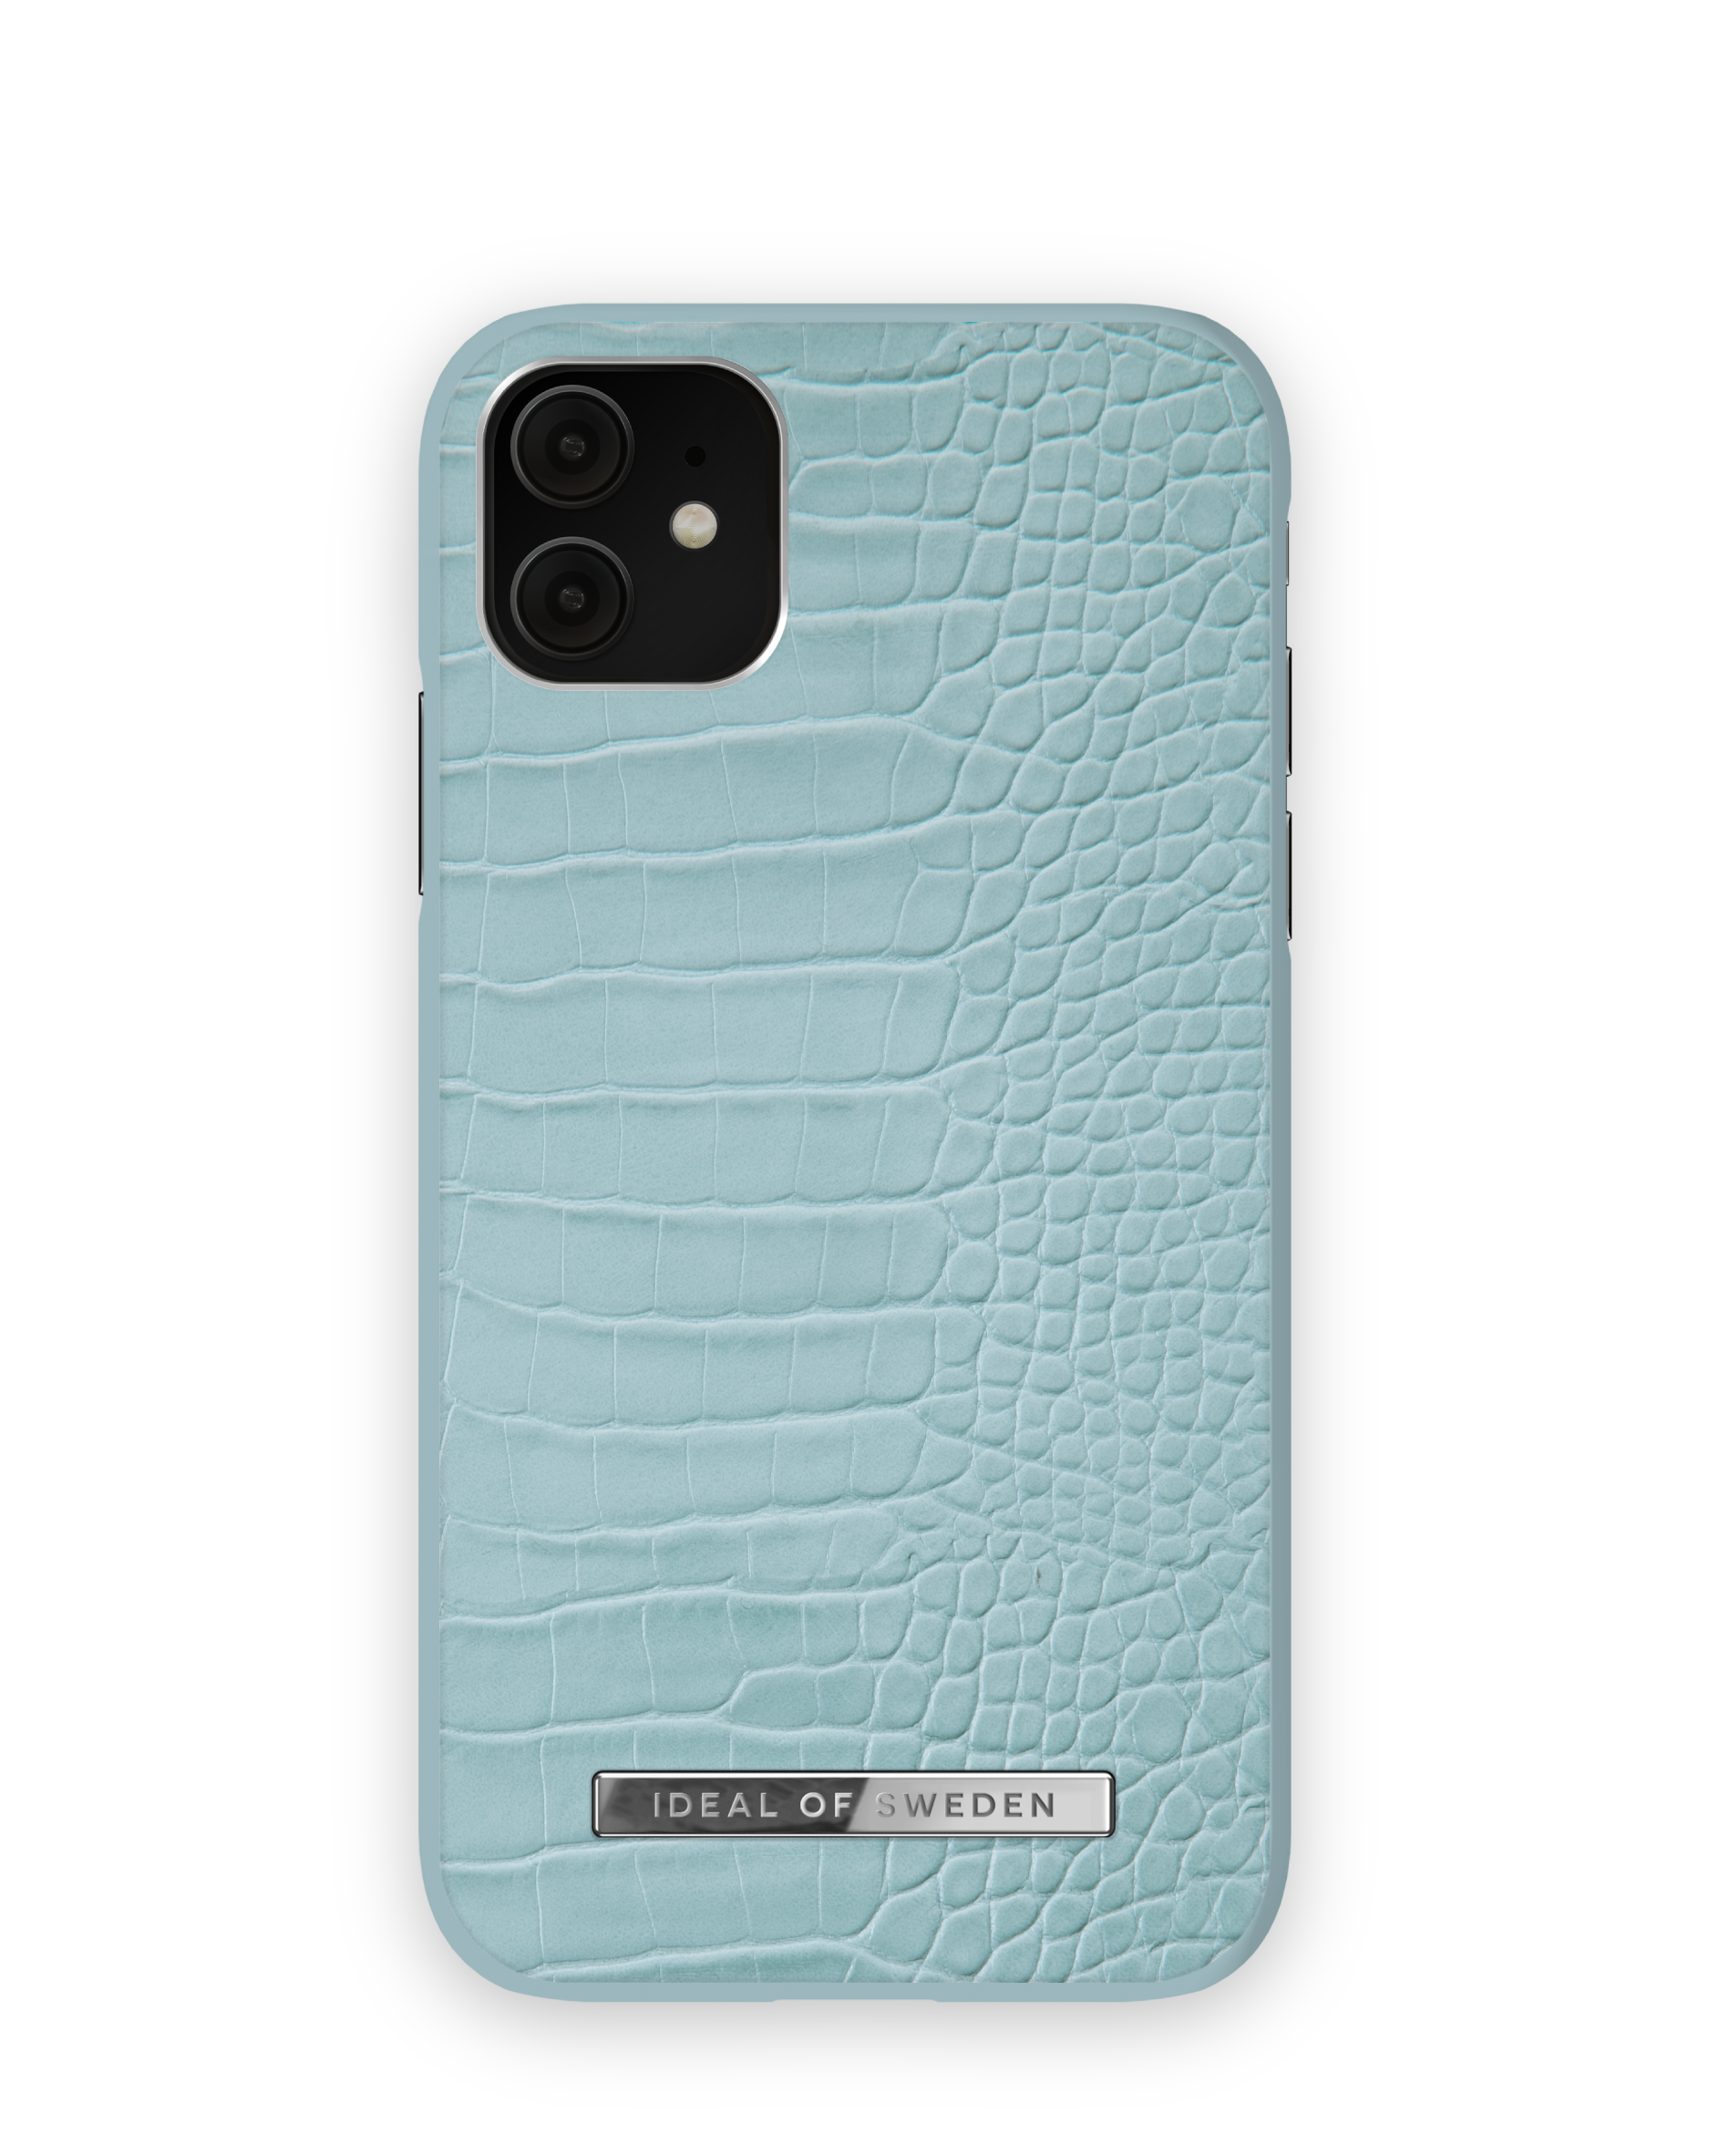 SWEDEN OF XR, Backcover, Croco iPhone Blue / 11 Soft IDEAL IDACSS22-I1961-394, Apple, iPhone